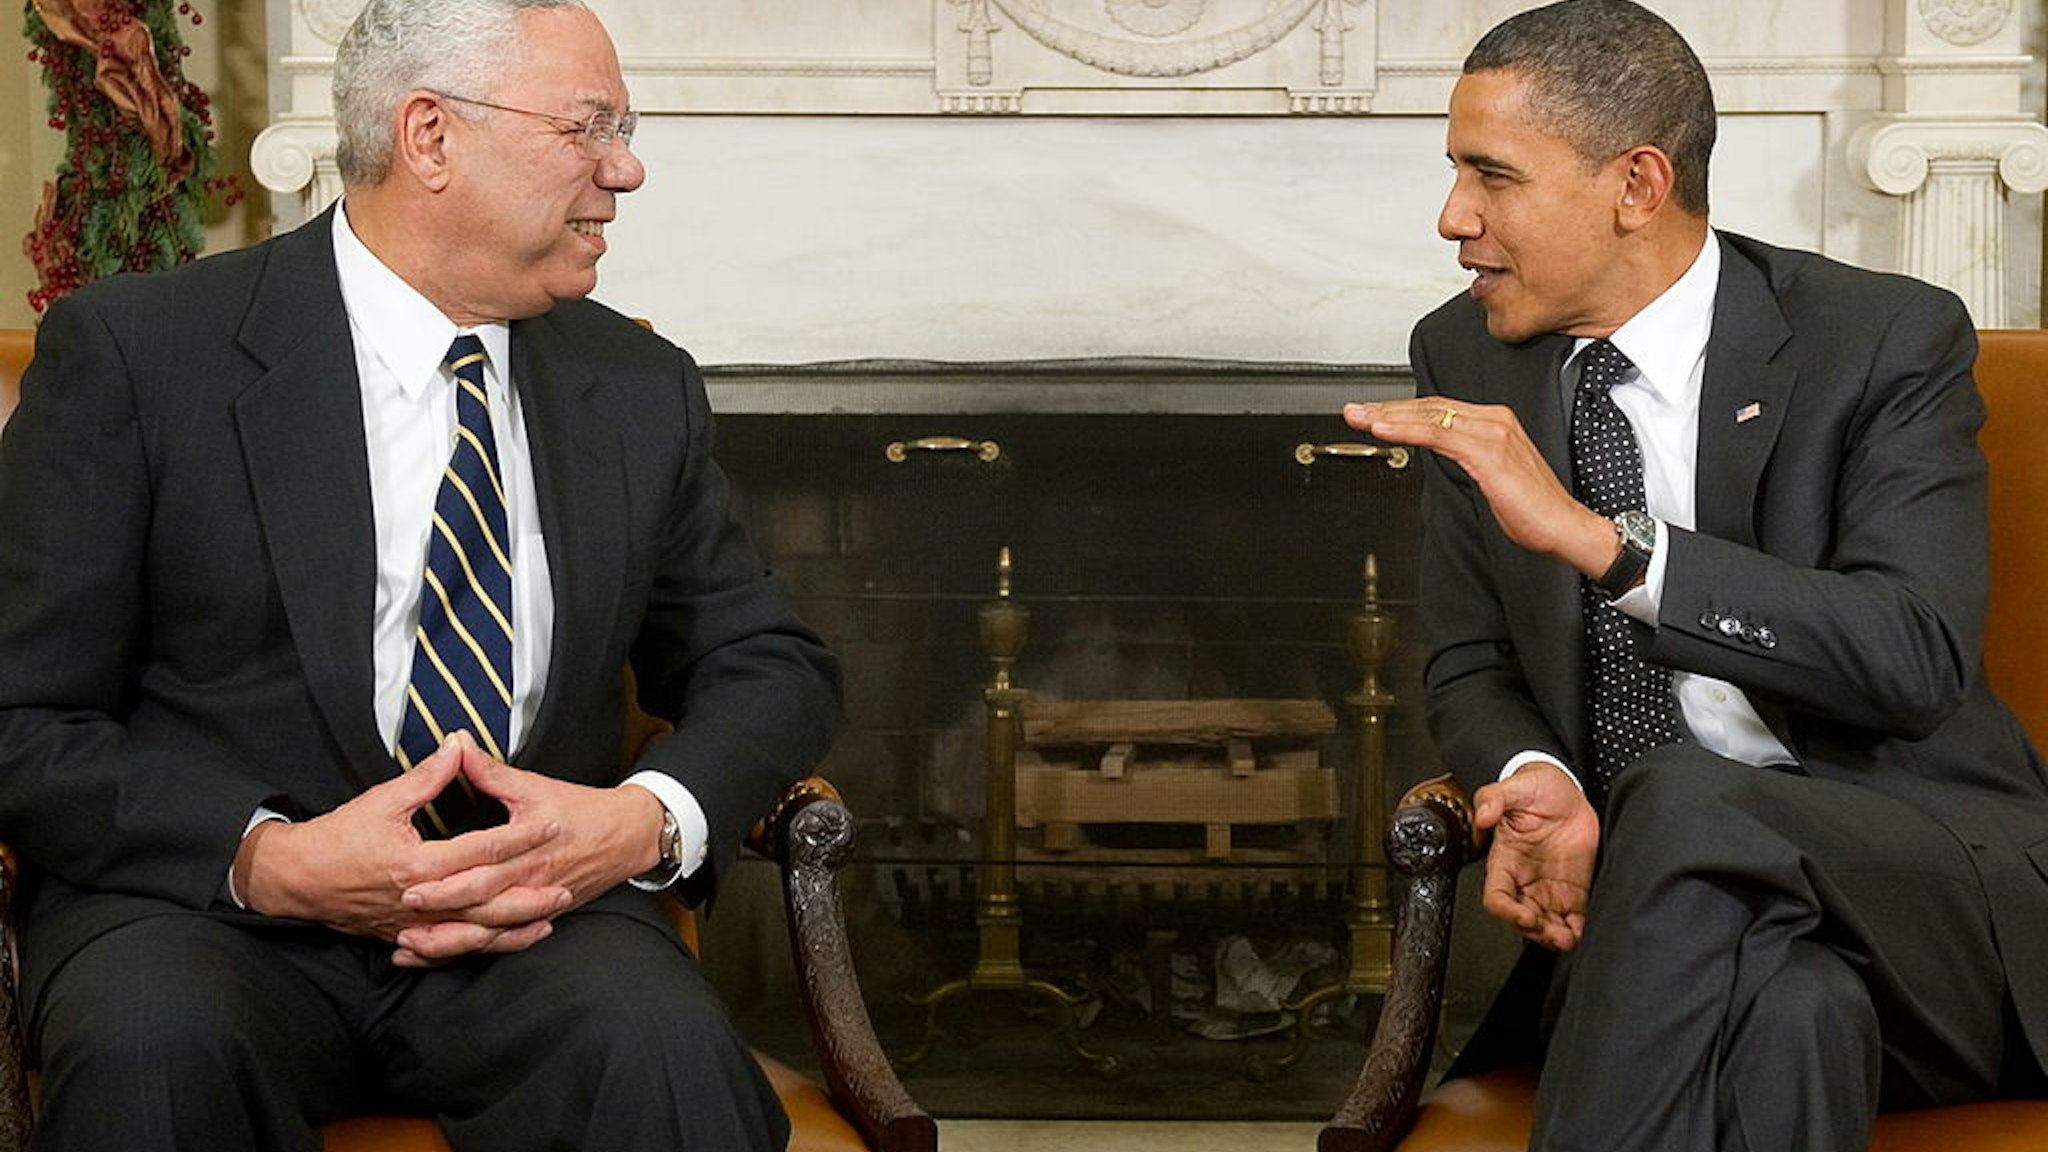 US President Barack Obama speaks with former US Secretary of State General Colin Powell (L) during a meeting in the Oval Office of the White House in Washington, DC, December 1, 2010